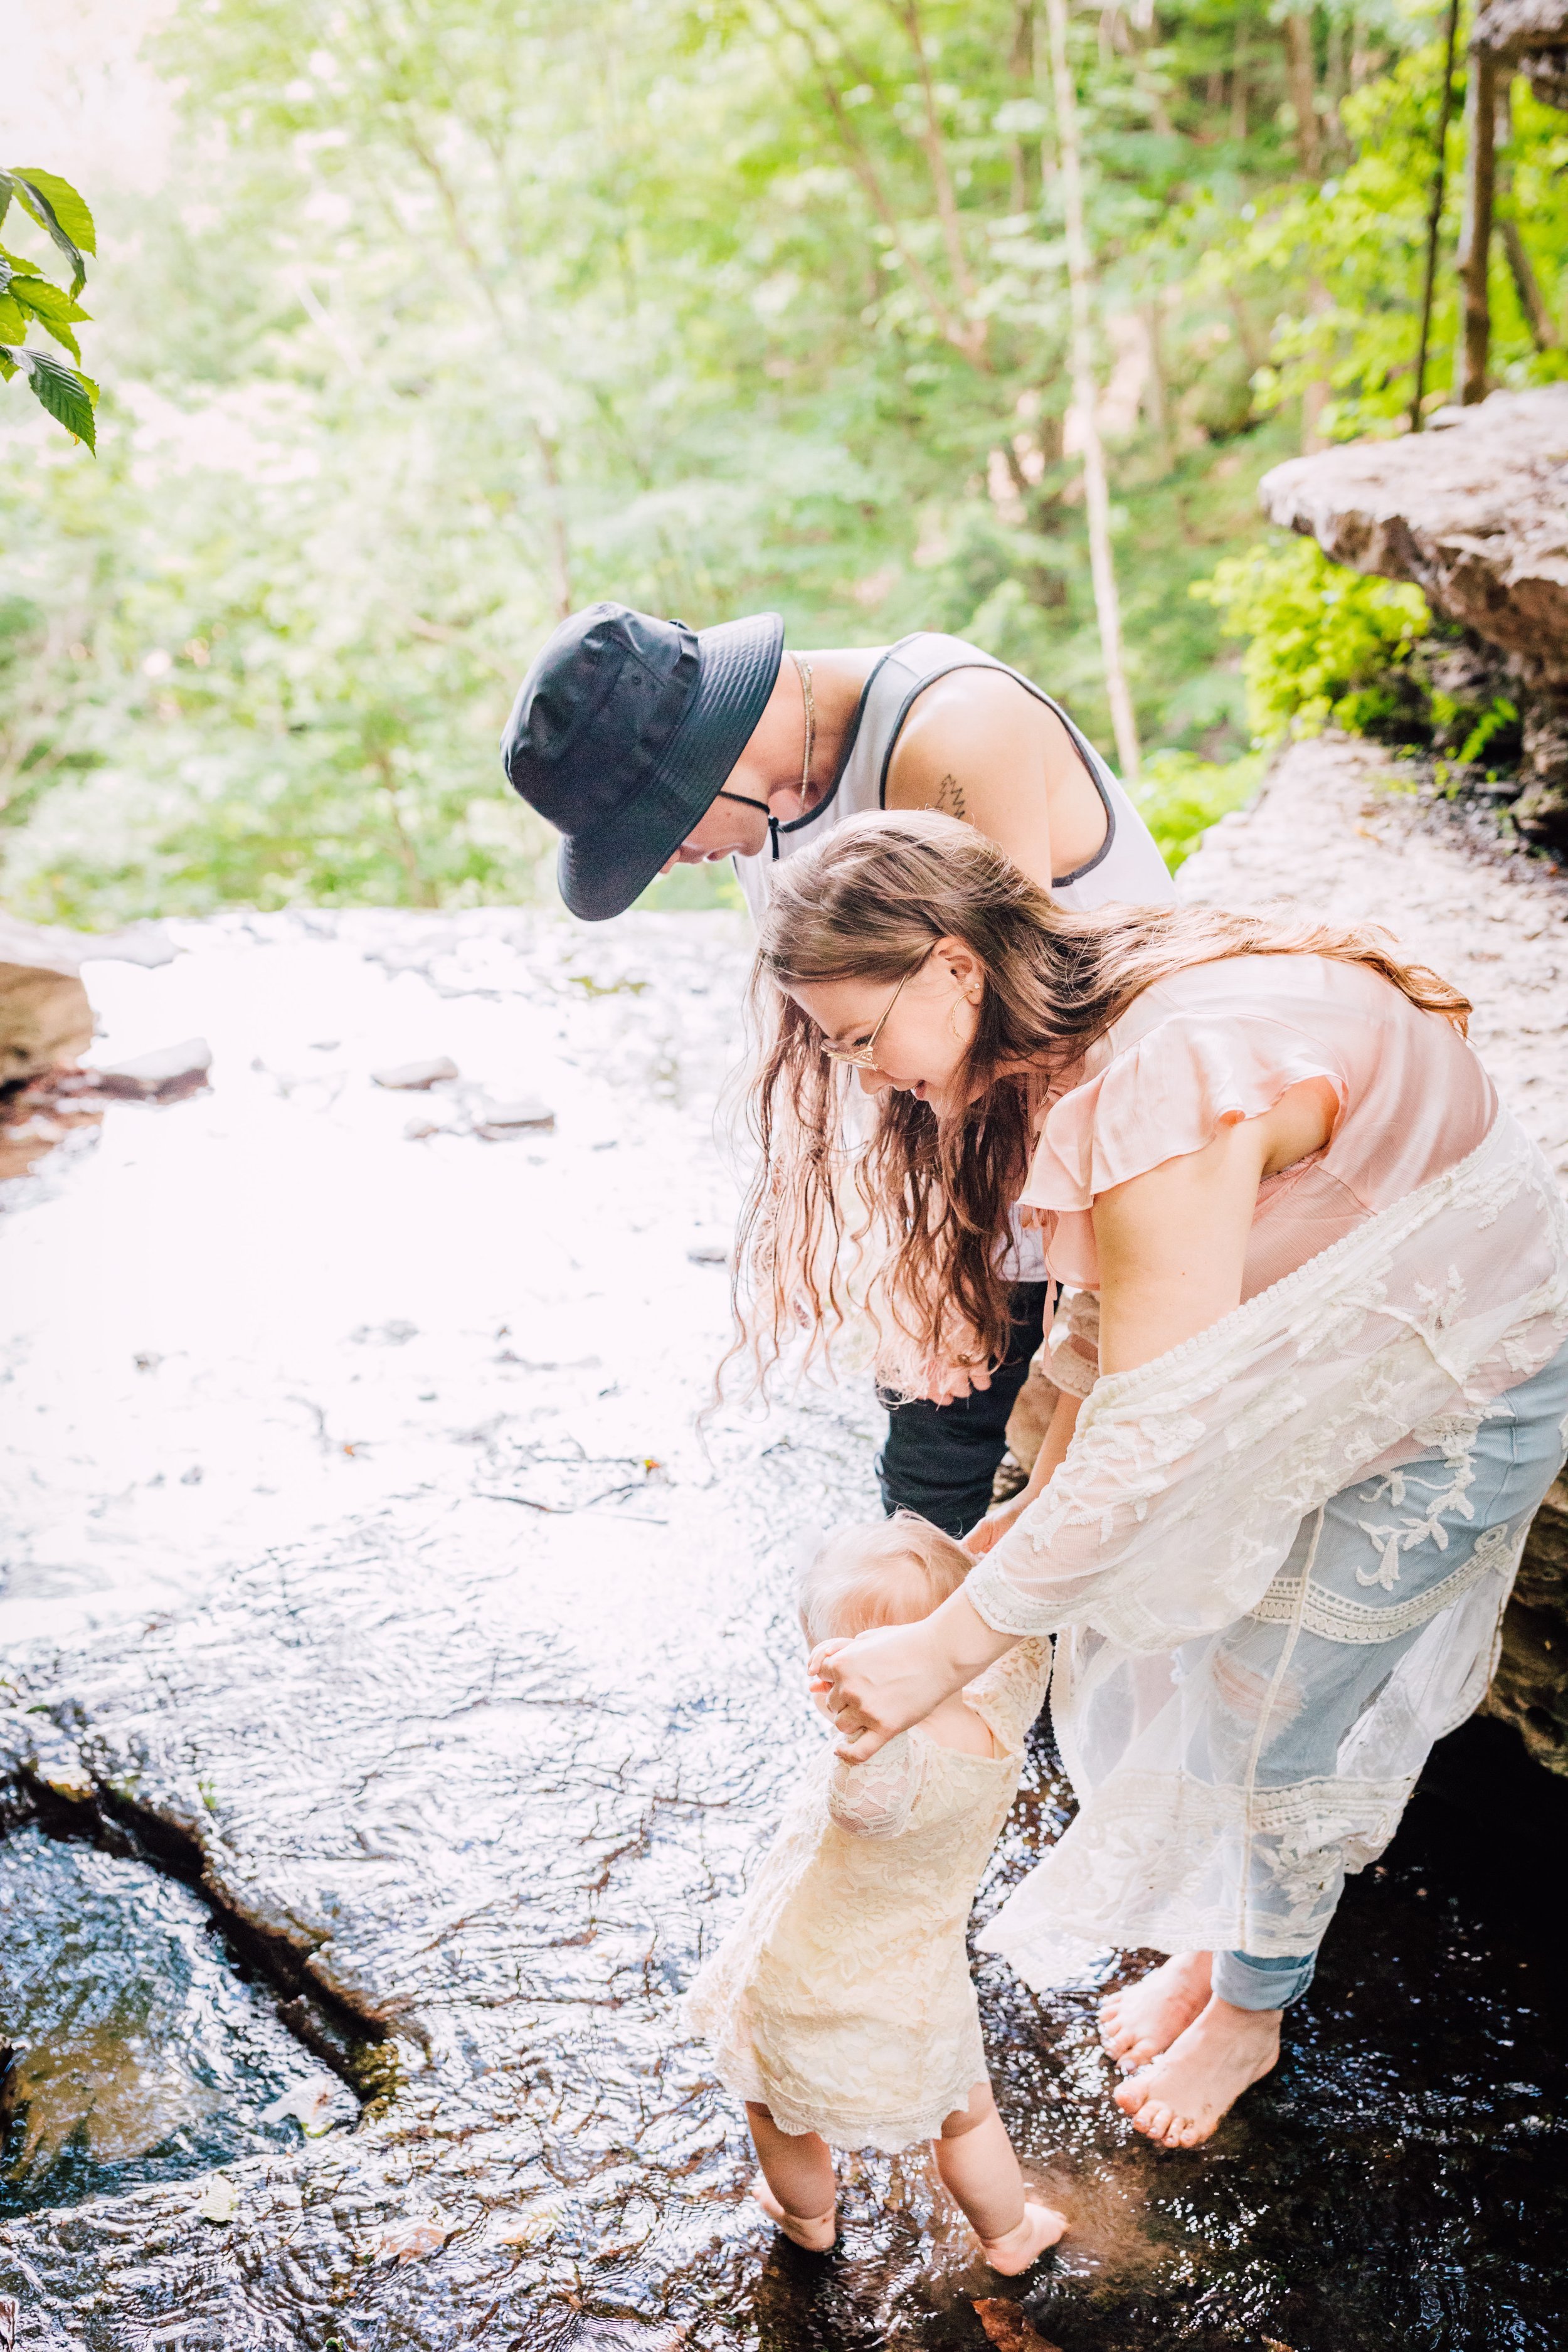  Mom and dad help their baby walk on a stream during a waterfall photo shoot 